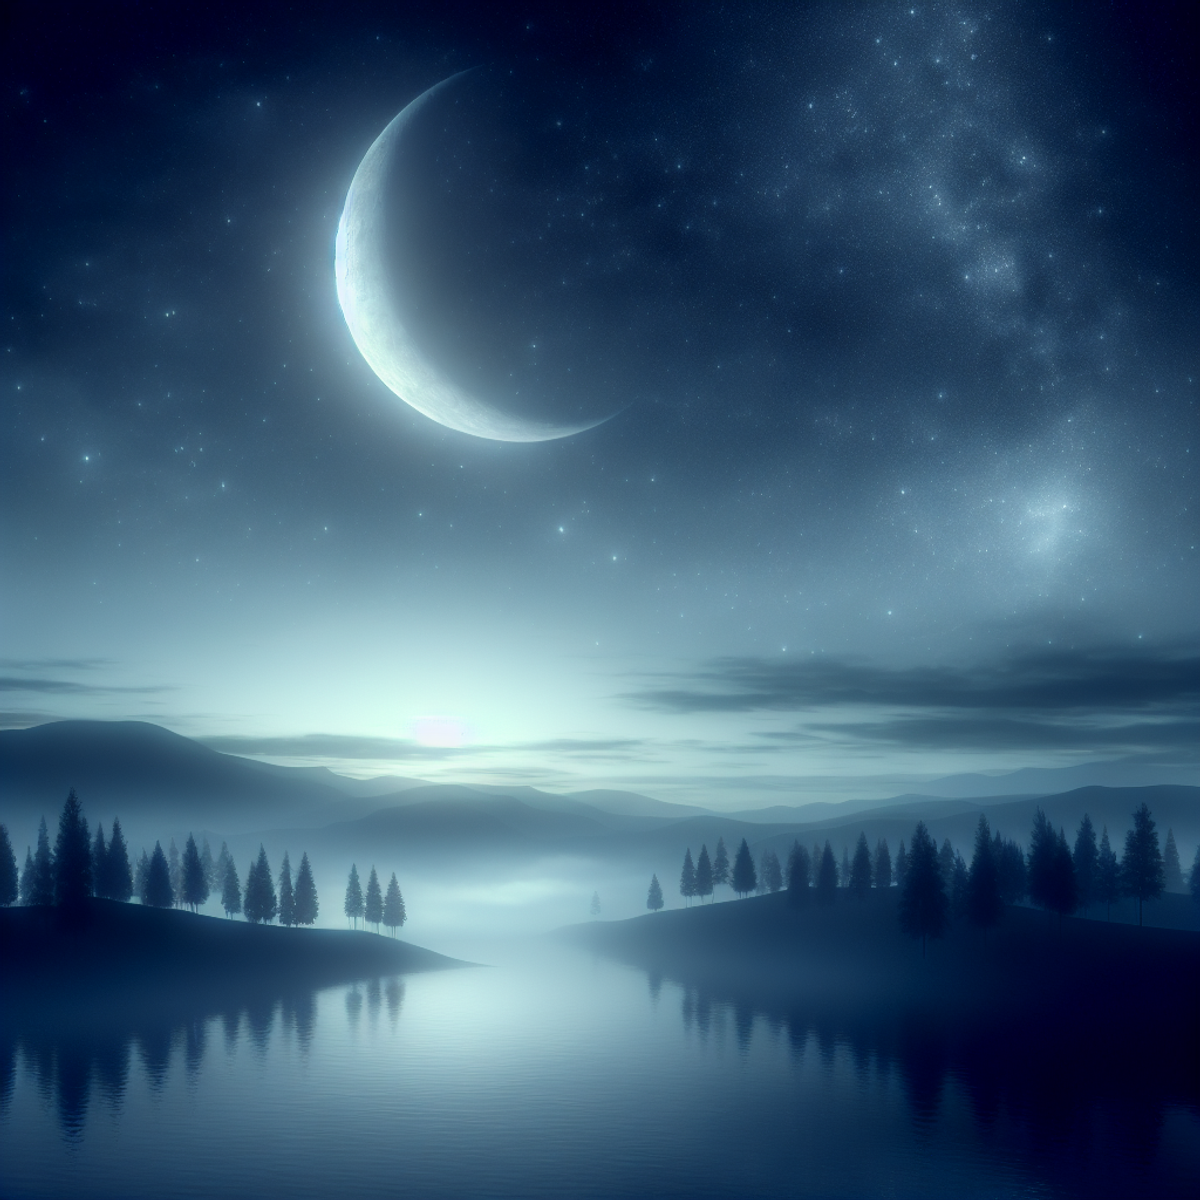 A crescent moon shining over a serene landscape.